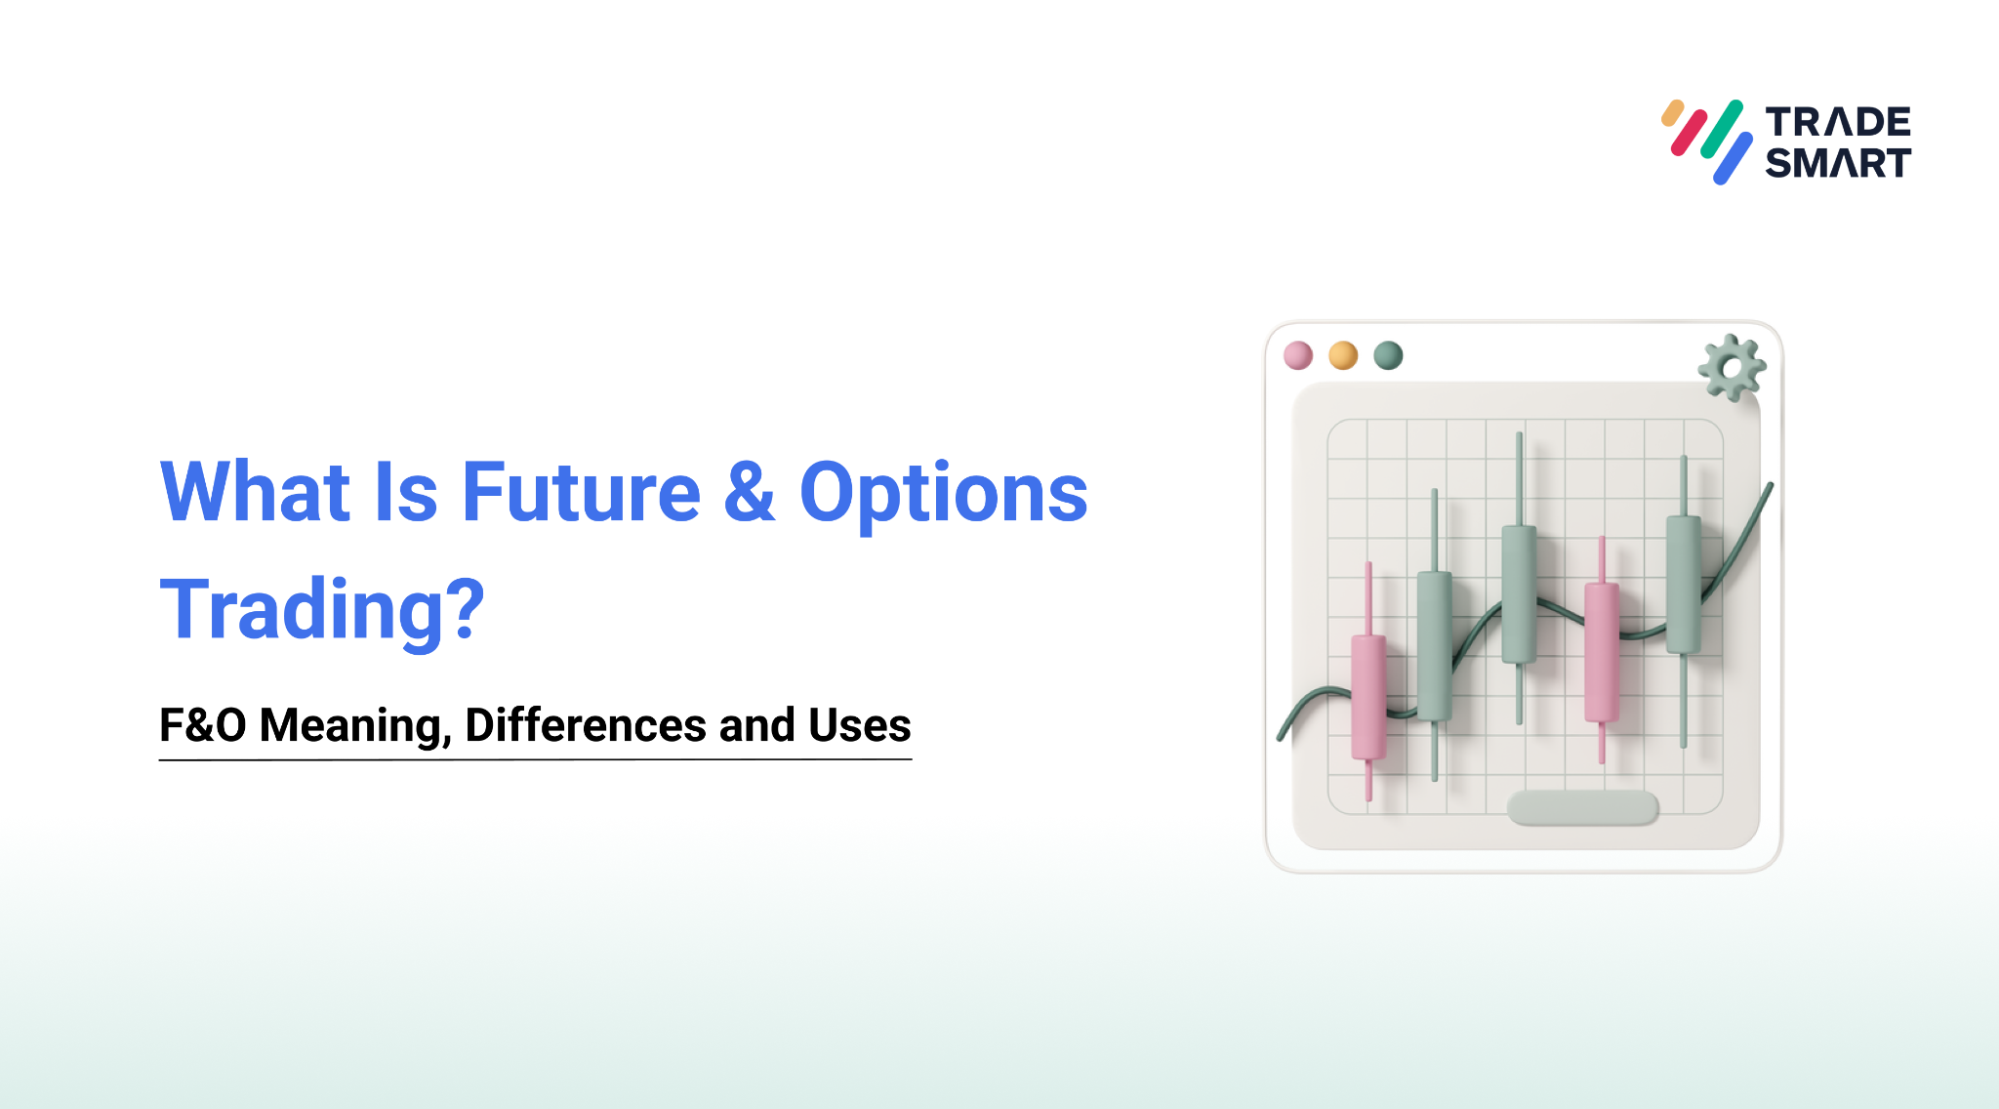 What Is Futures & Options Trading? F&O Meaning, Differences and Uses